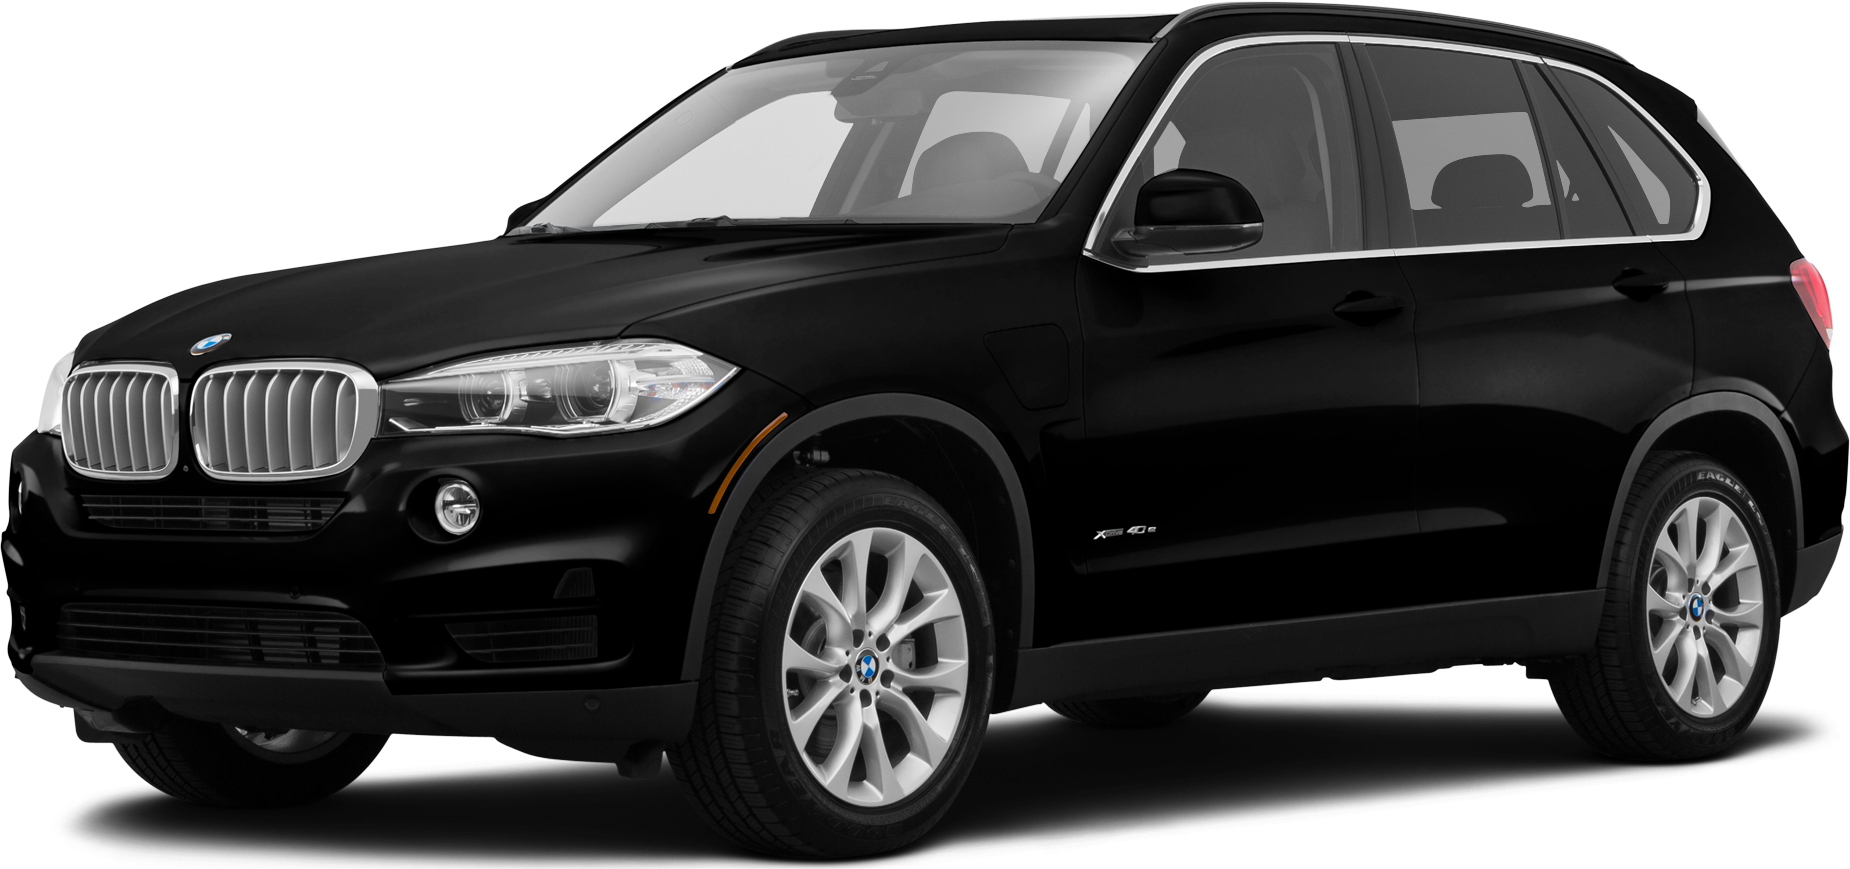 2016 BMW X5 Price, Value, Ratings & Reviews